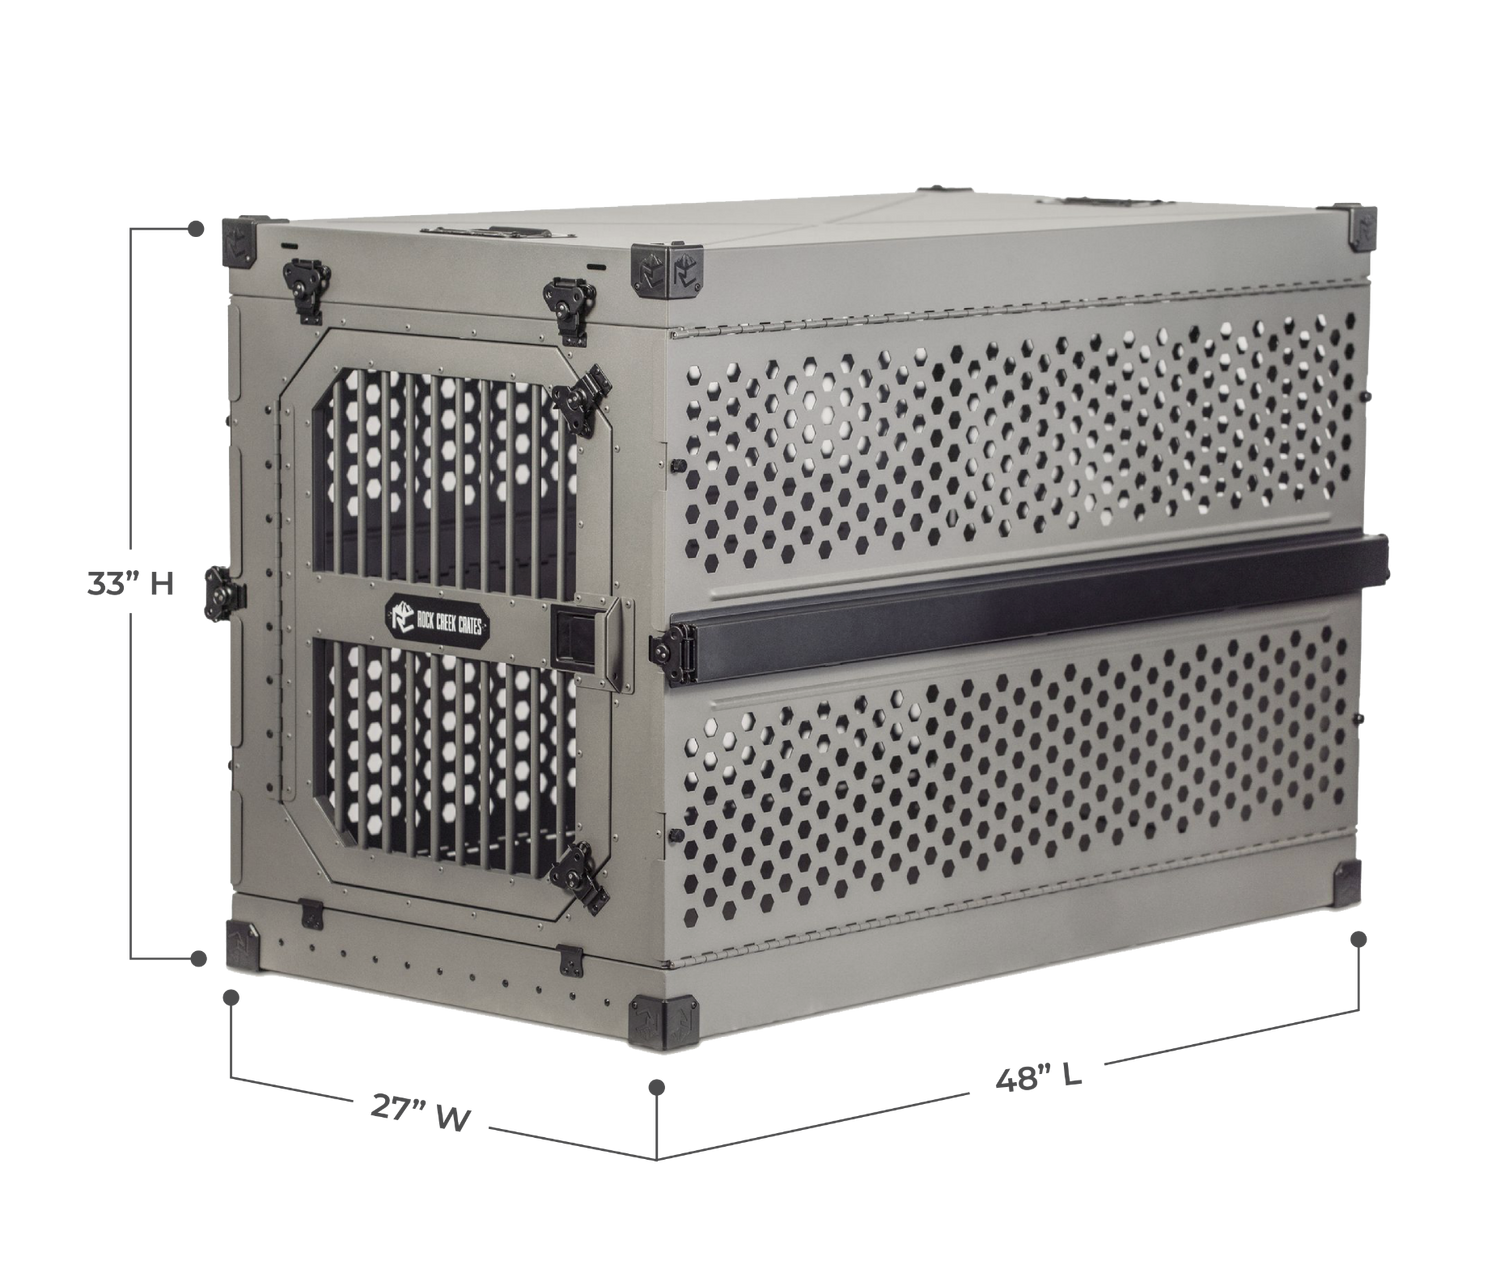 XX-Large collapsible dog crate by Rock Creek Crates showing external dimensions